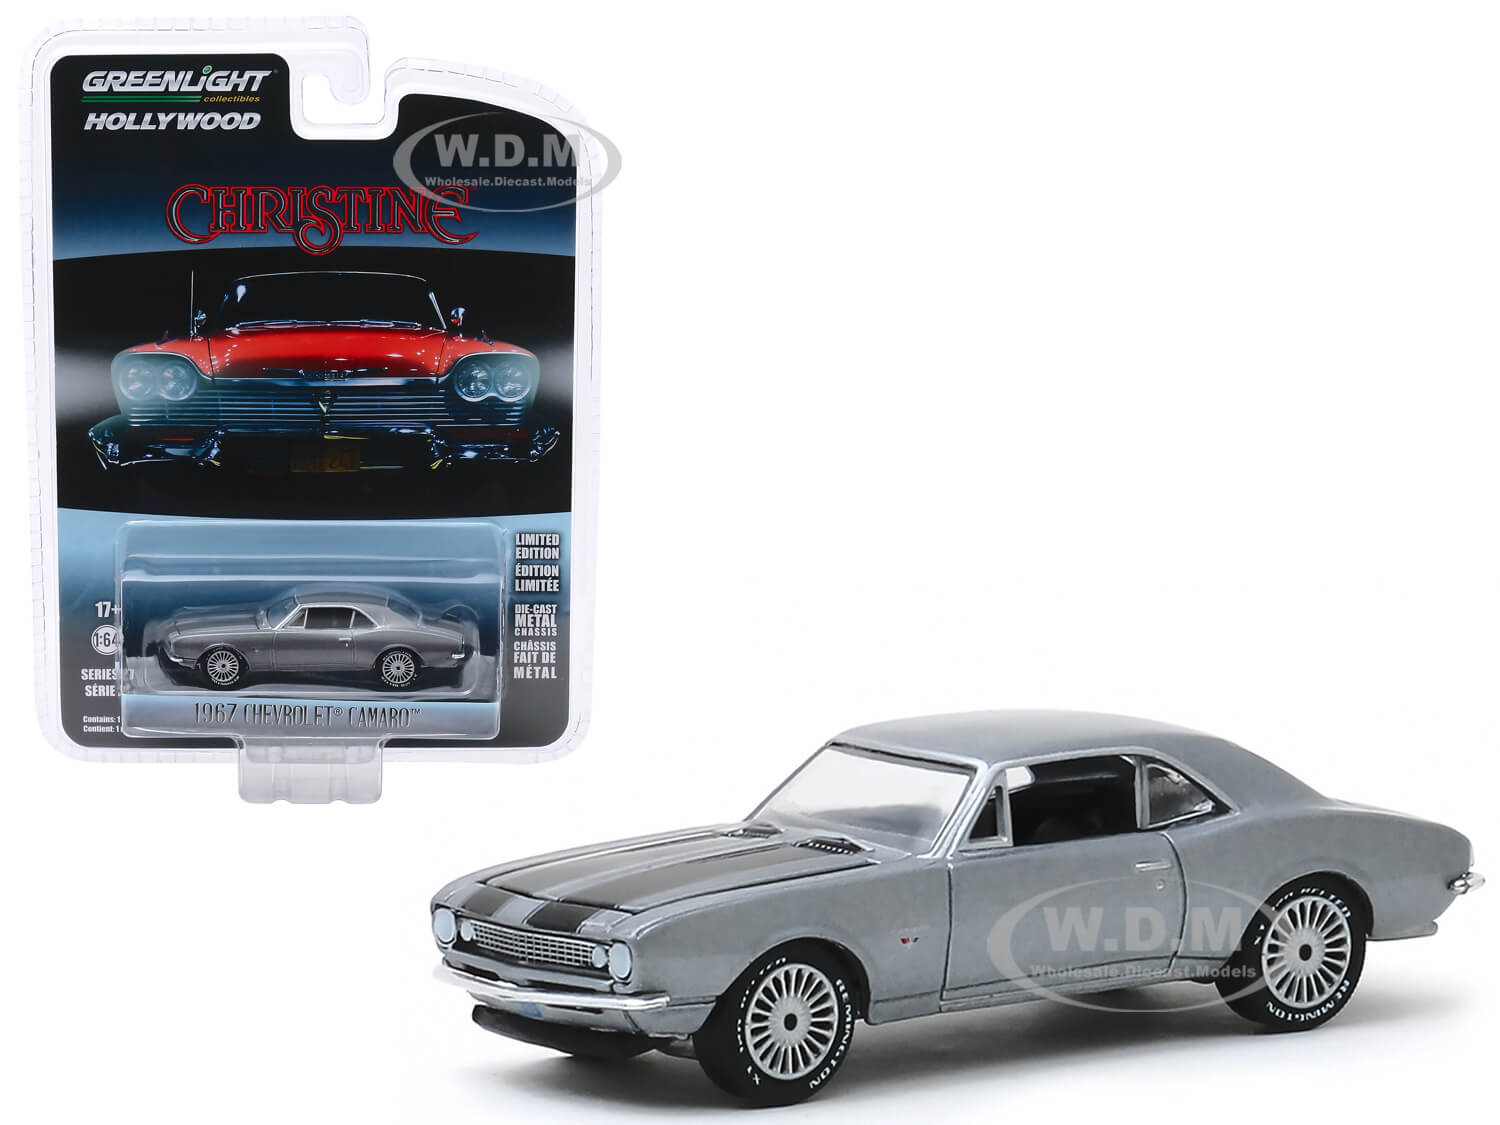 1967 Chevrolet Camaro Gray Metallic With Black Stripes (buddy Reppertons) "christine" (1983) Movie "hollywood Series" Release 27 1/64 Diecast Model C